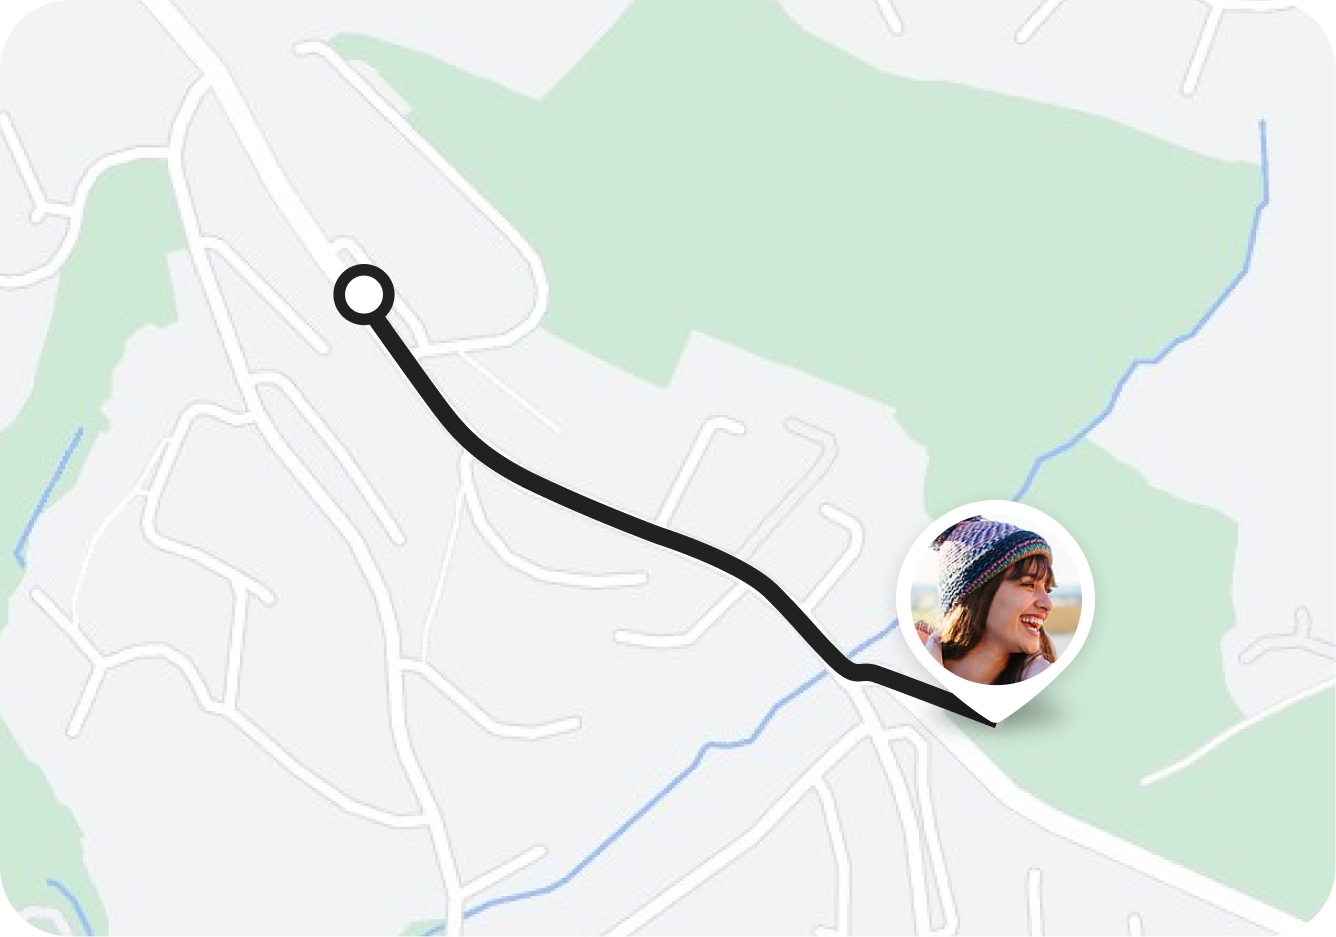 Map showing Life360 Location History with a woman's icon on the map